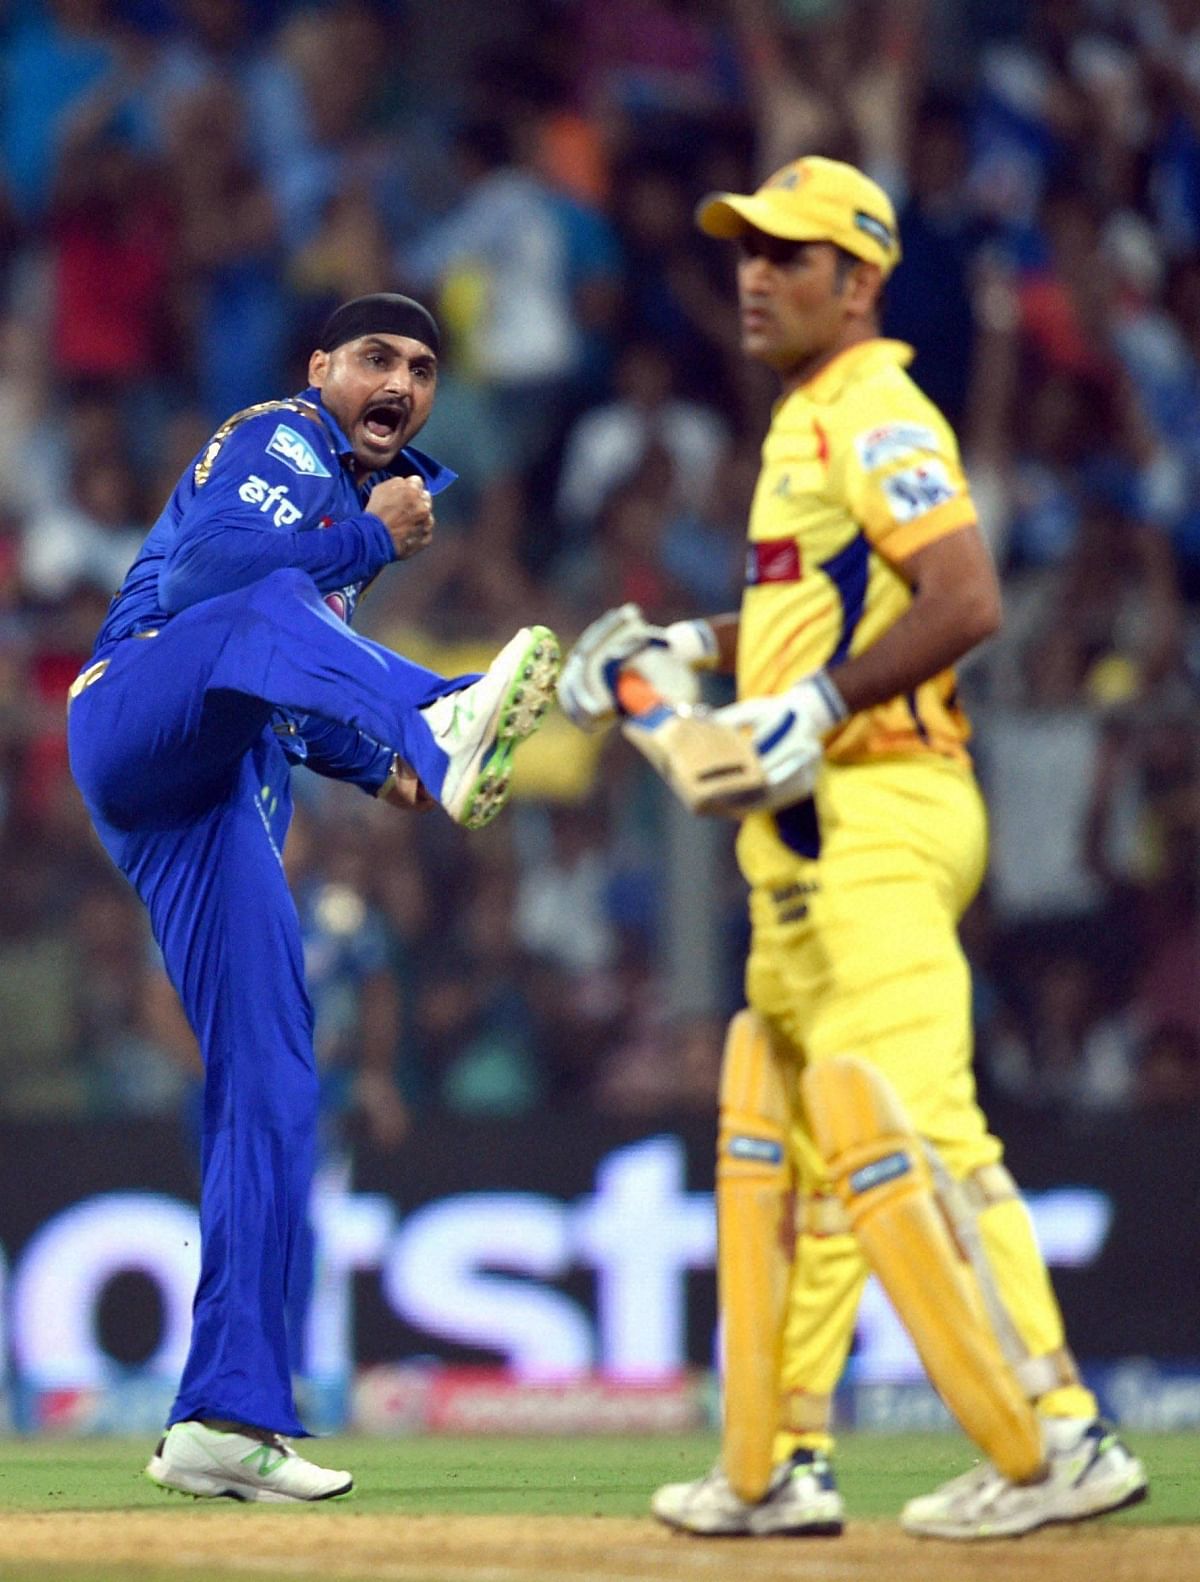 MI and CSK have played three finals, with Mumbai emerging victorious in two.